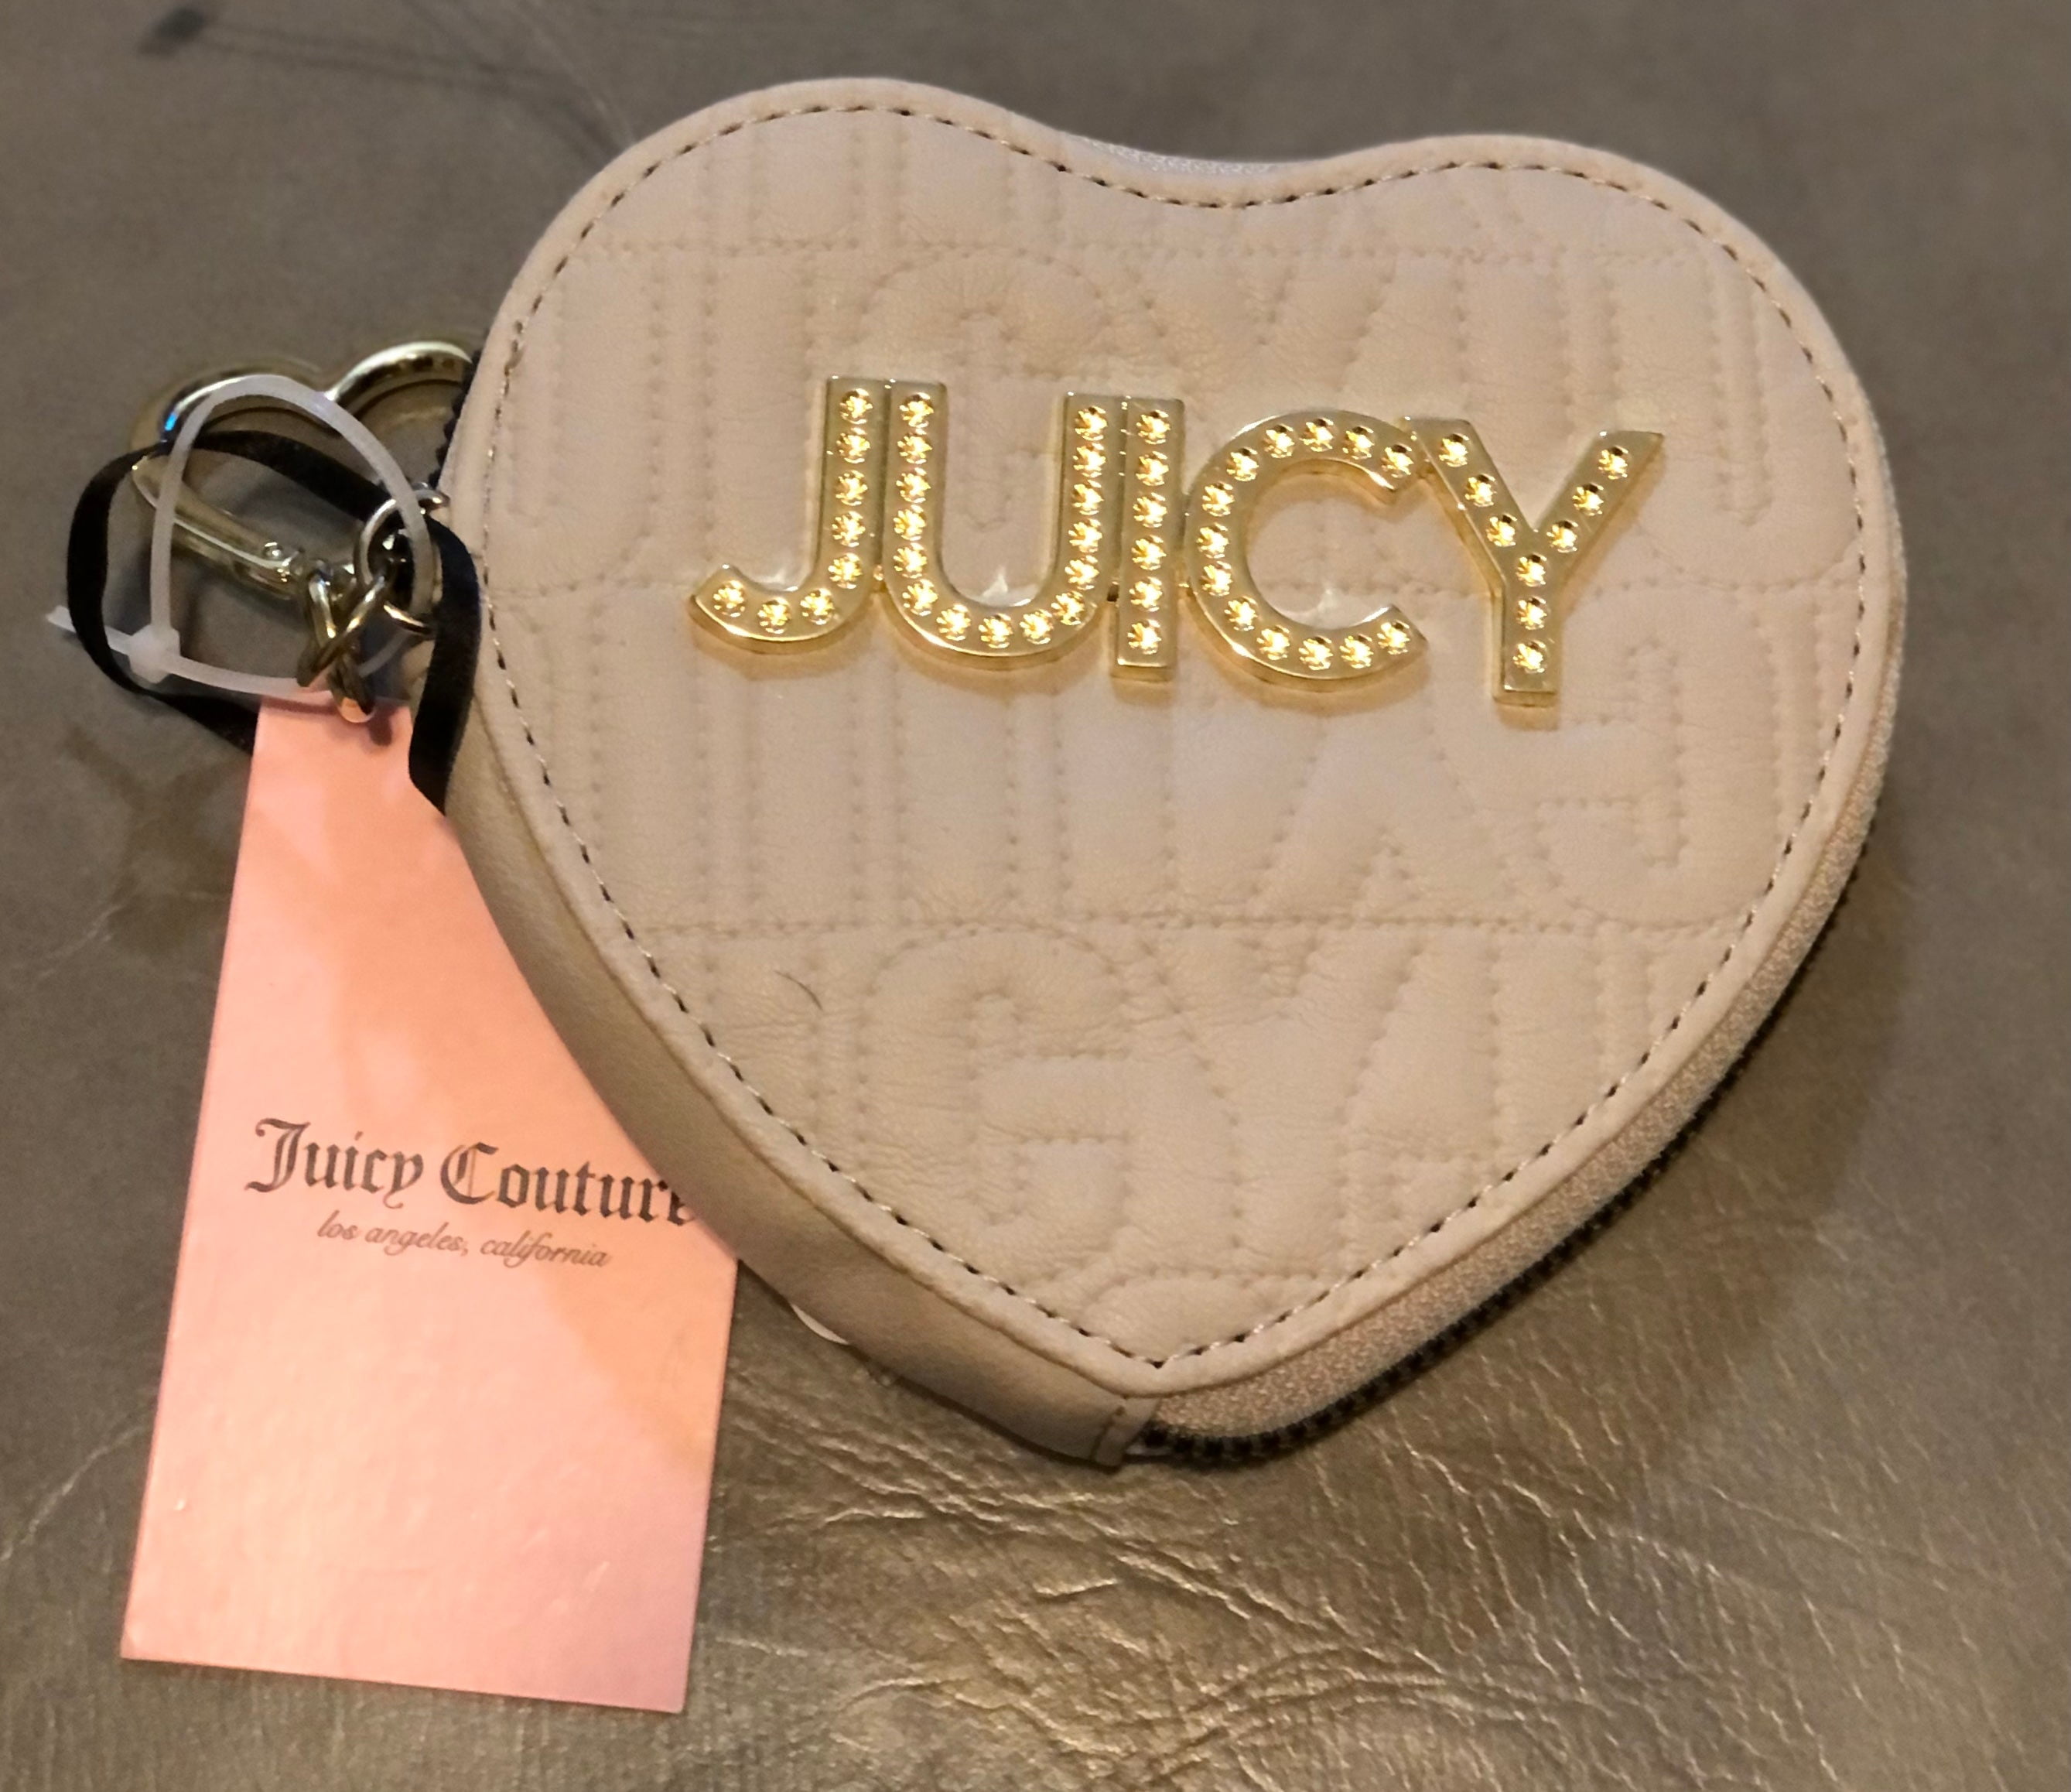 Does this look like a fake juicy couture bag? : r/Depop